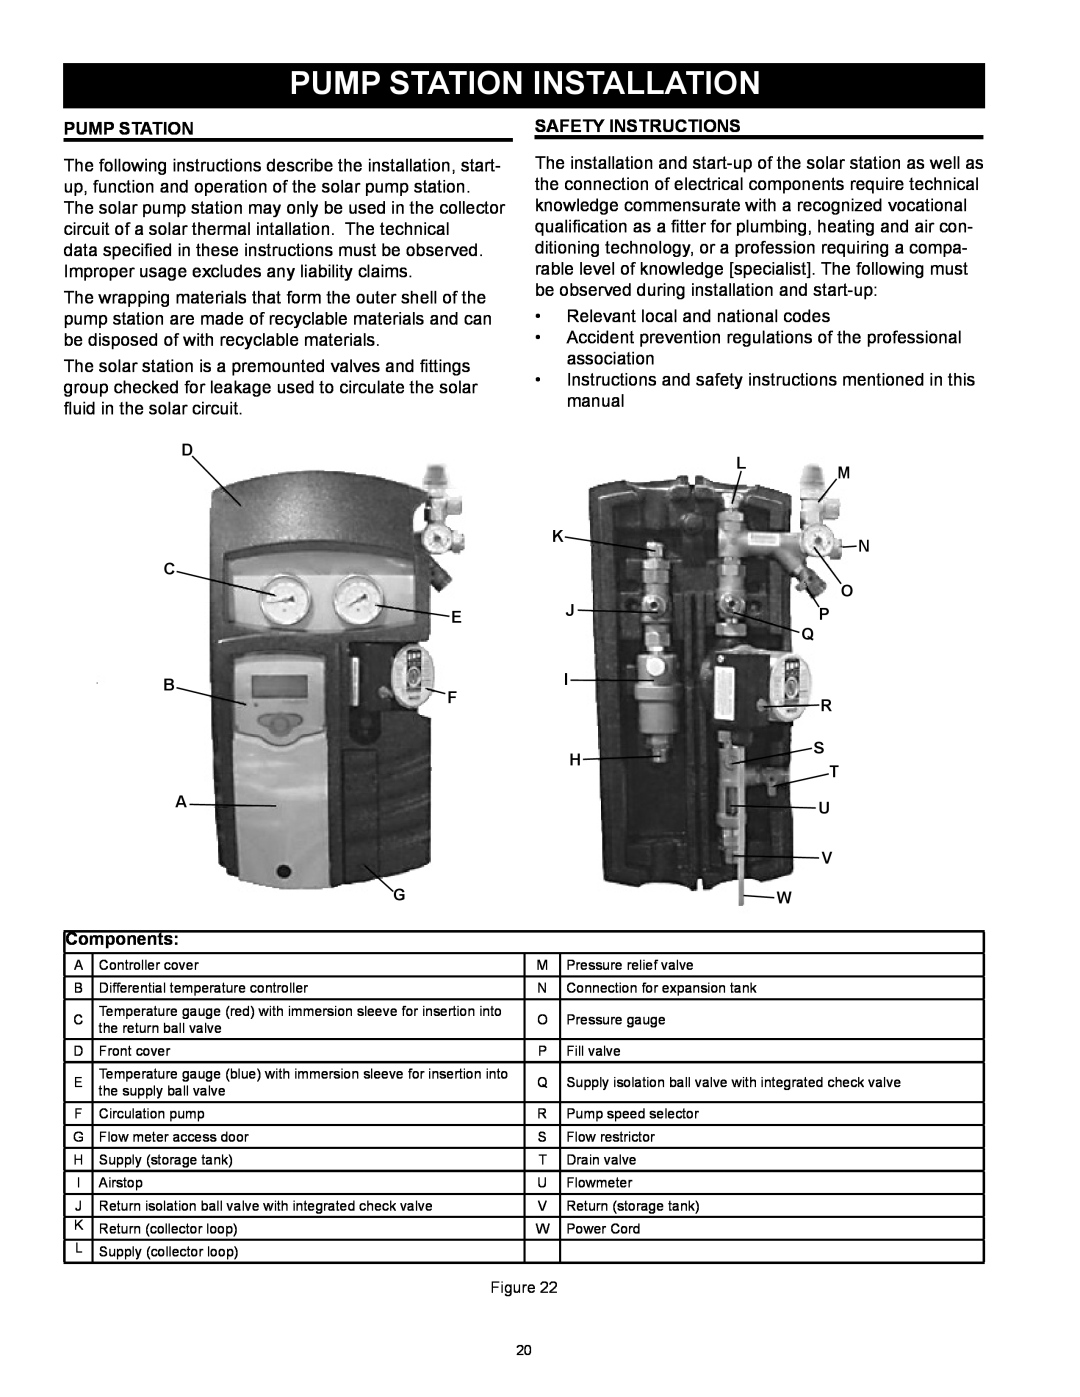 American Water Heater 318281-000 instruction manual Pump Station Installation, Components, Safety Instructions 